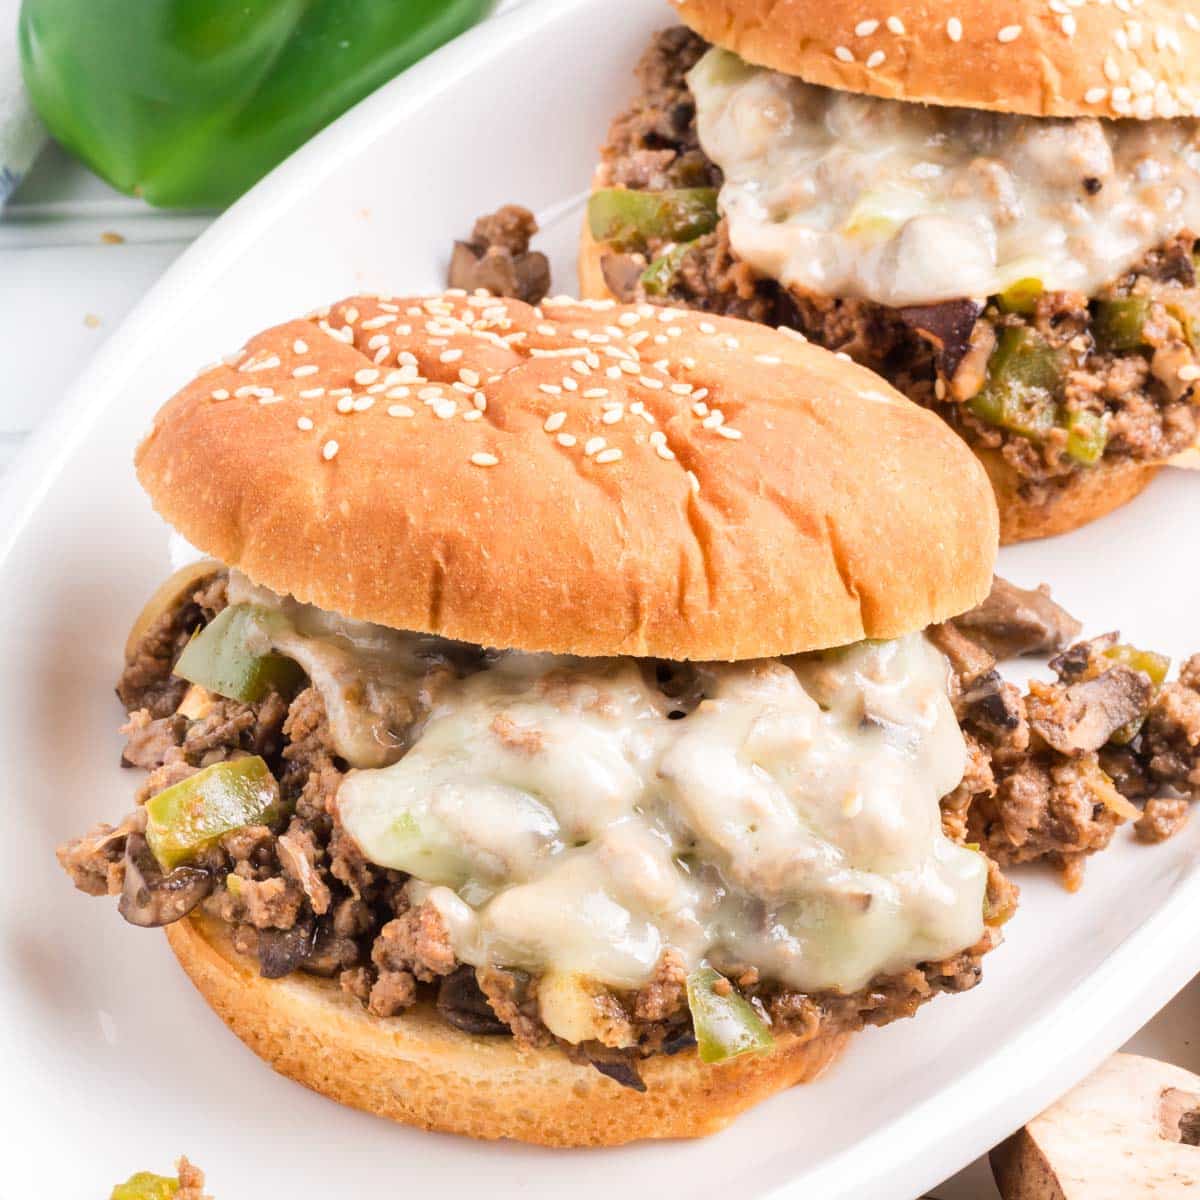 Two Philly Cheesesteak sloppy joes sandwiches on a white serving plate.